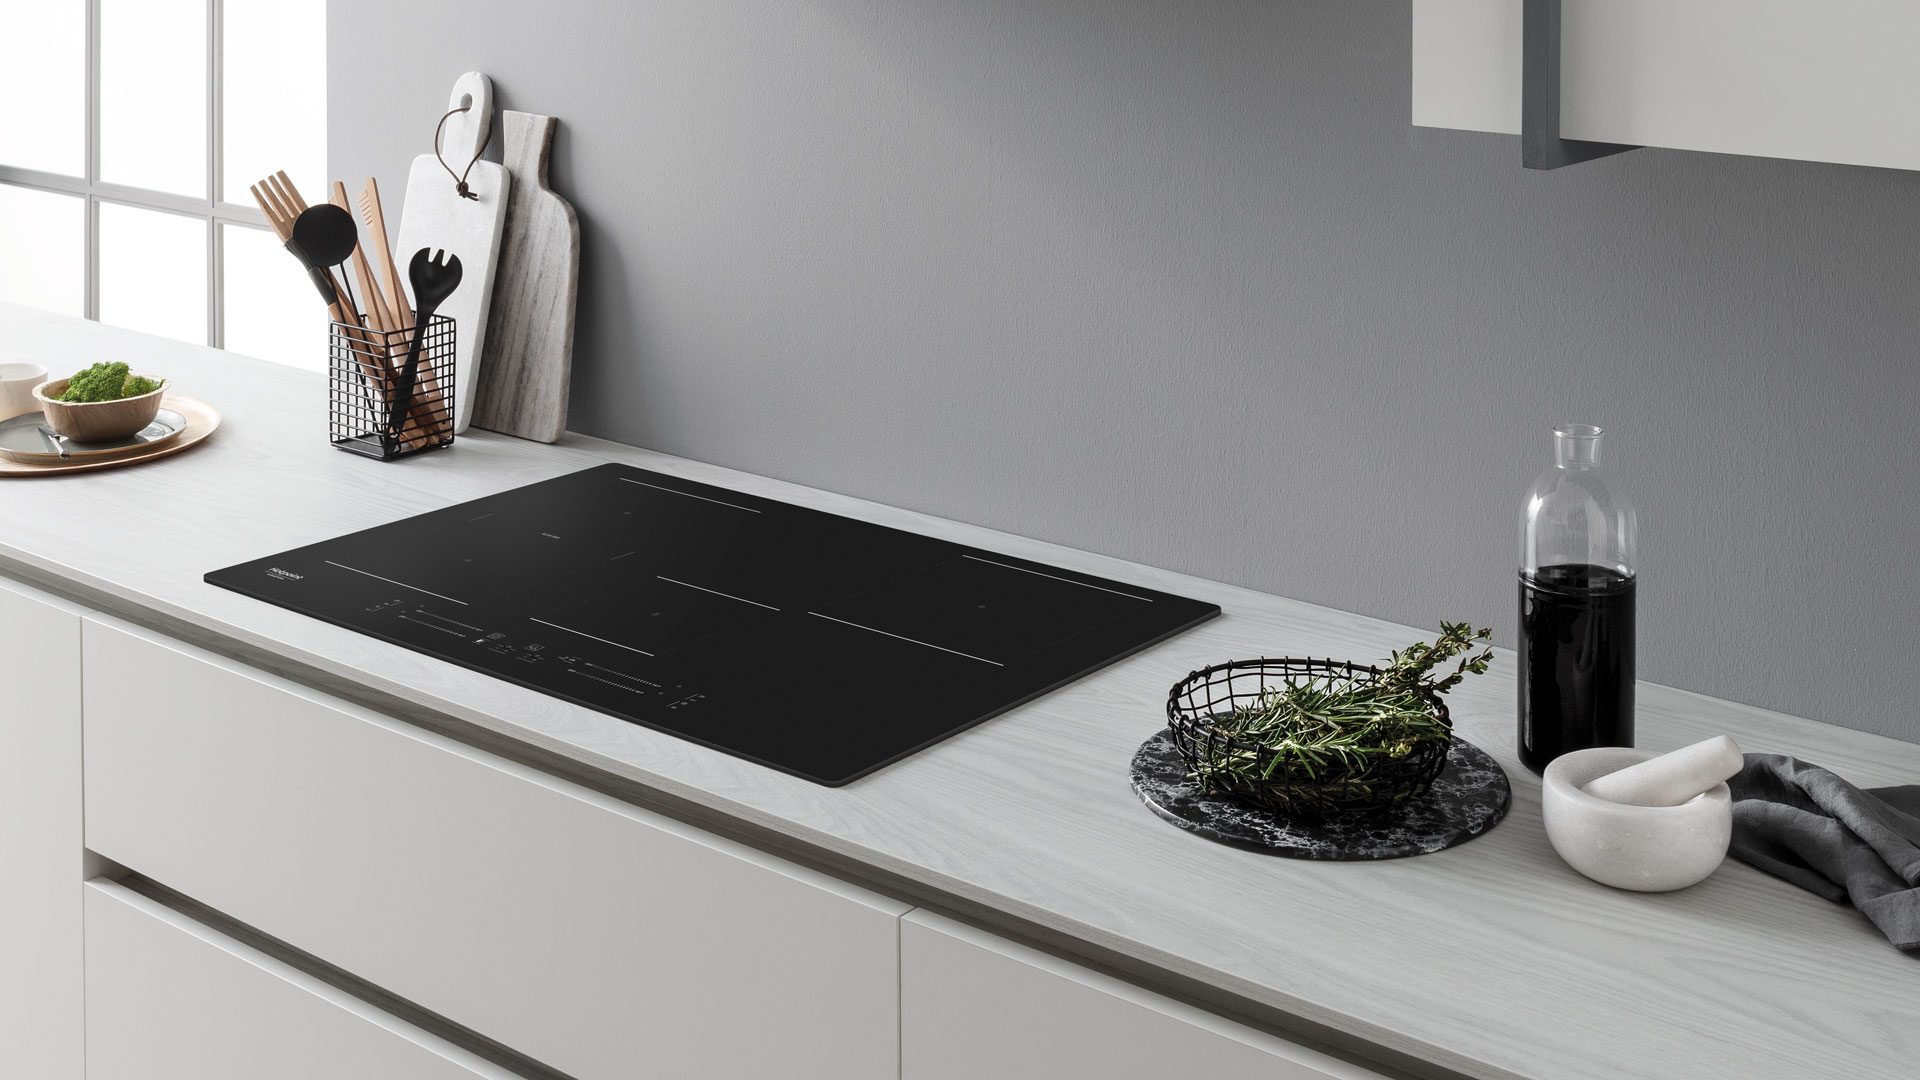 Try a new way of cooking with the active induction hobs by Hotpoint